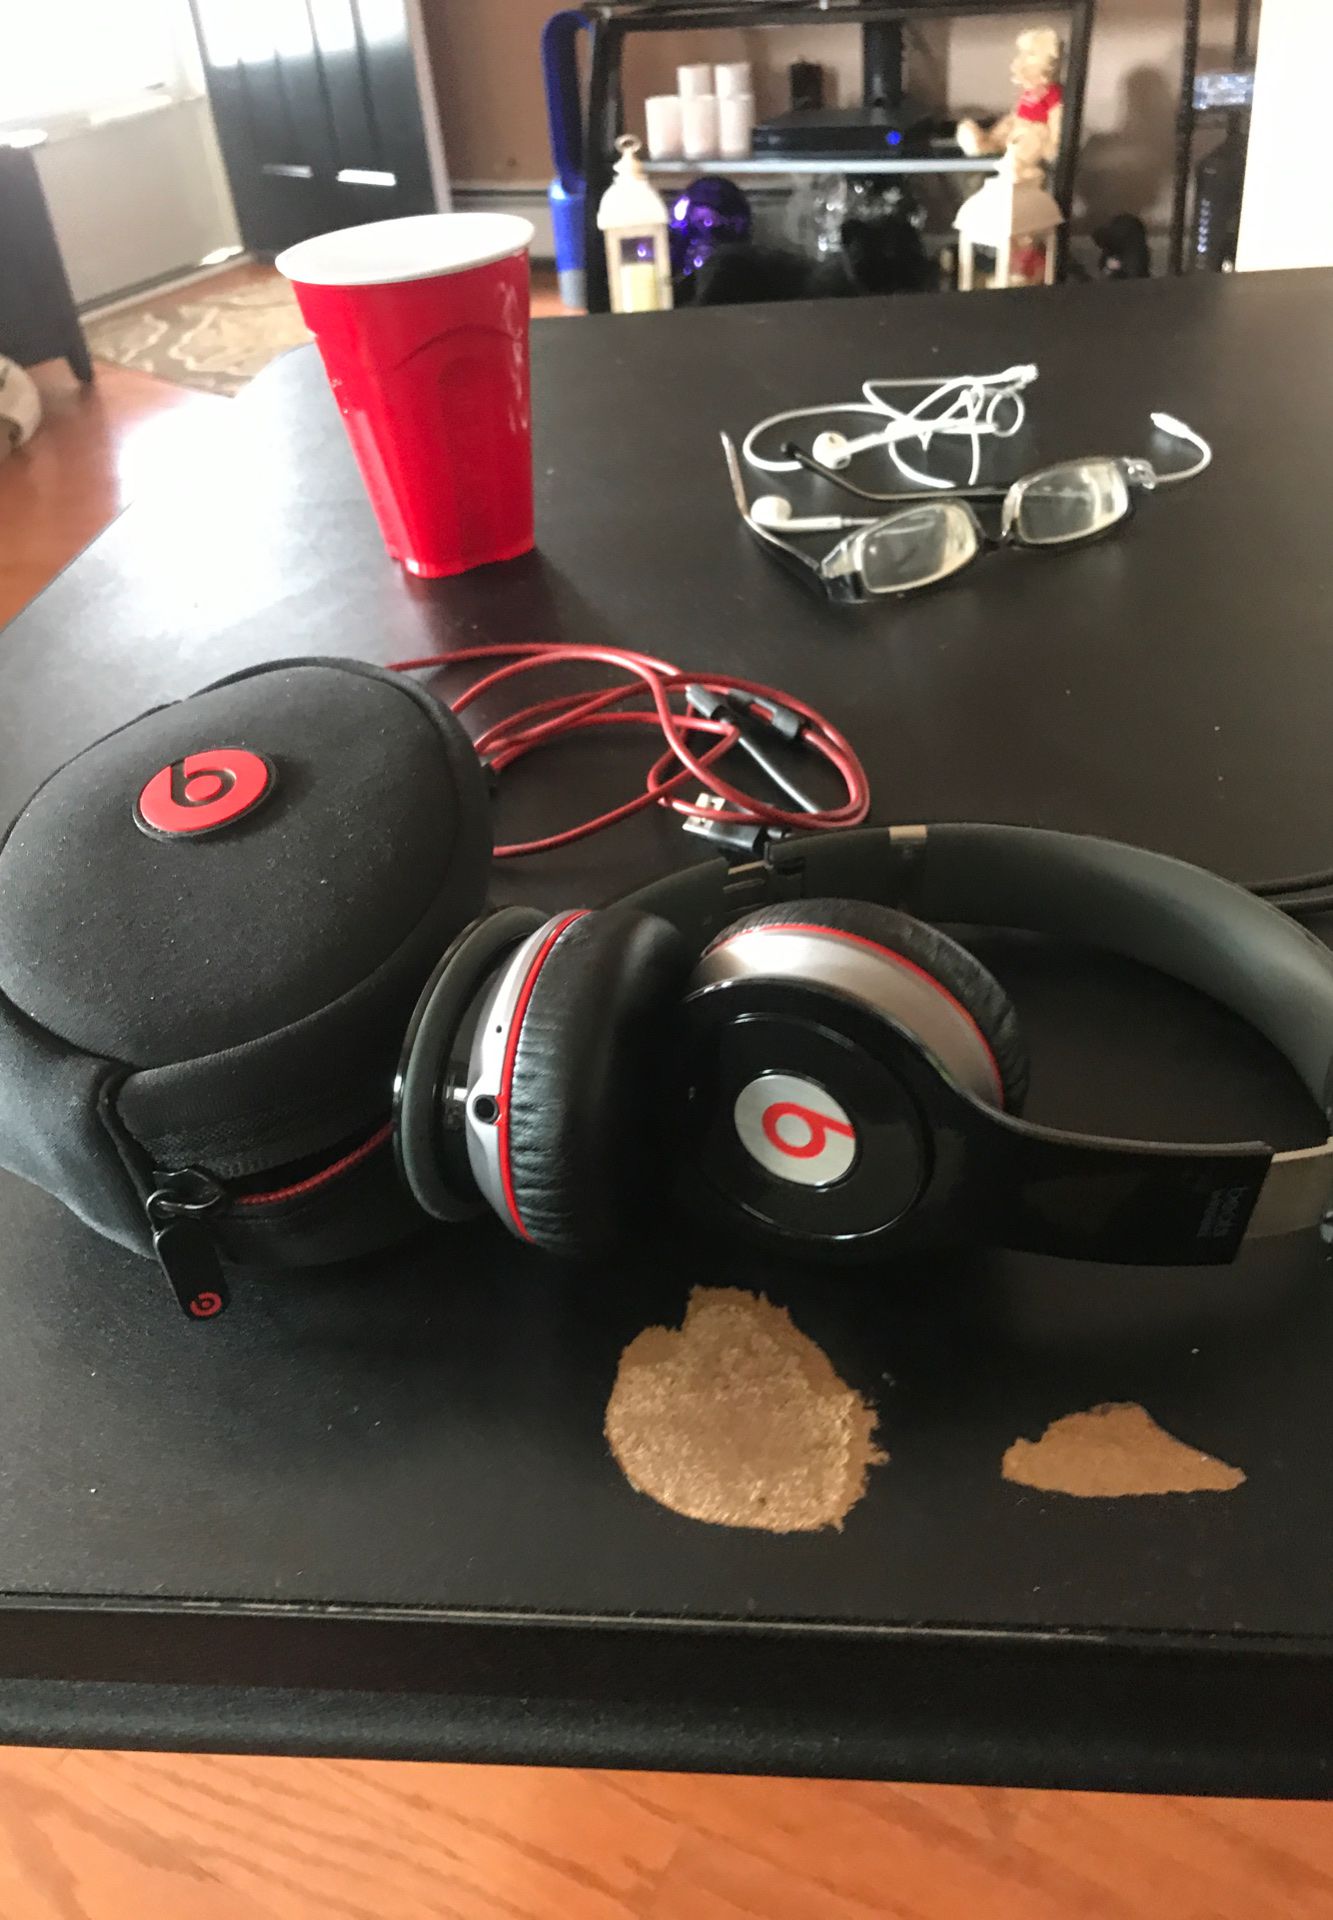 2 beats solo 2 wireless headphones only used a few days literally with all accessories